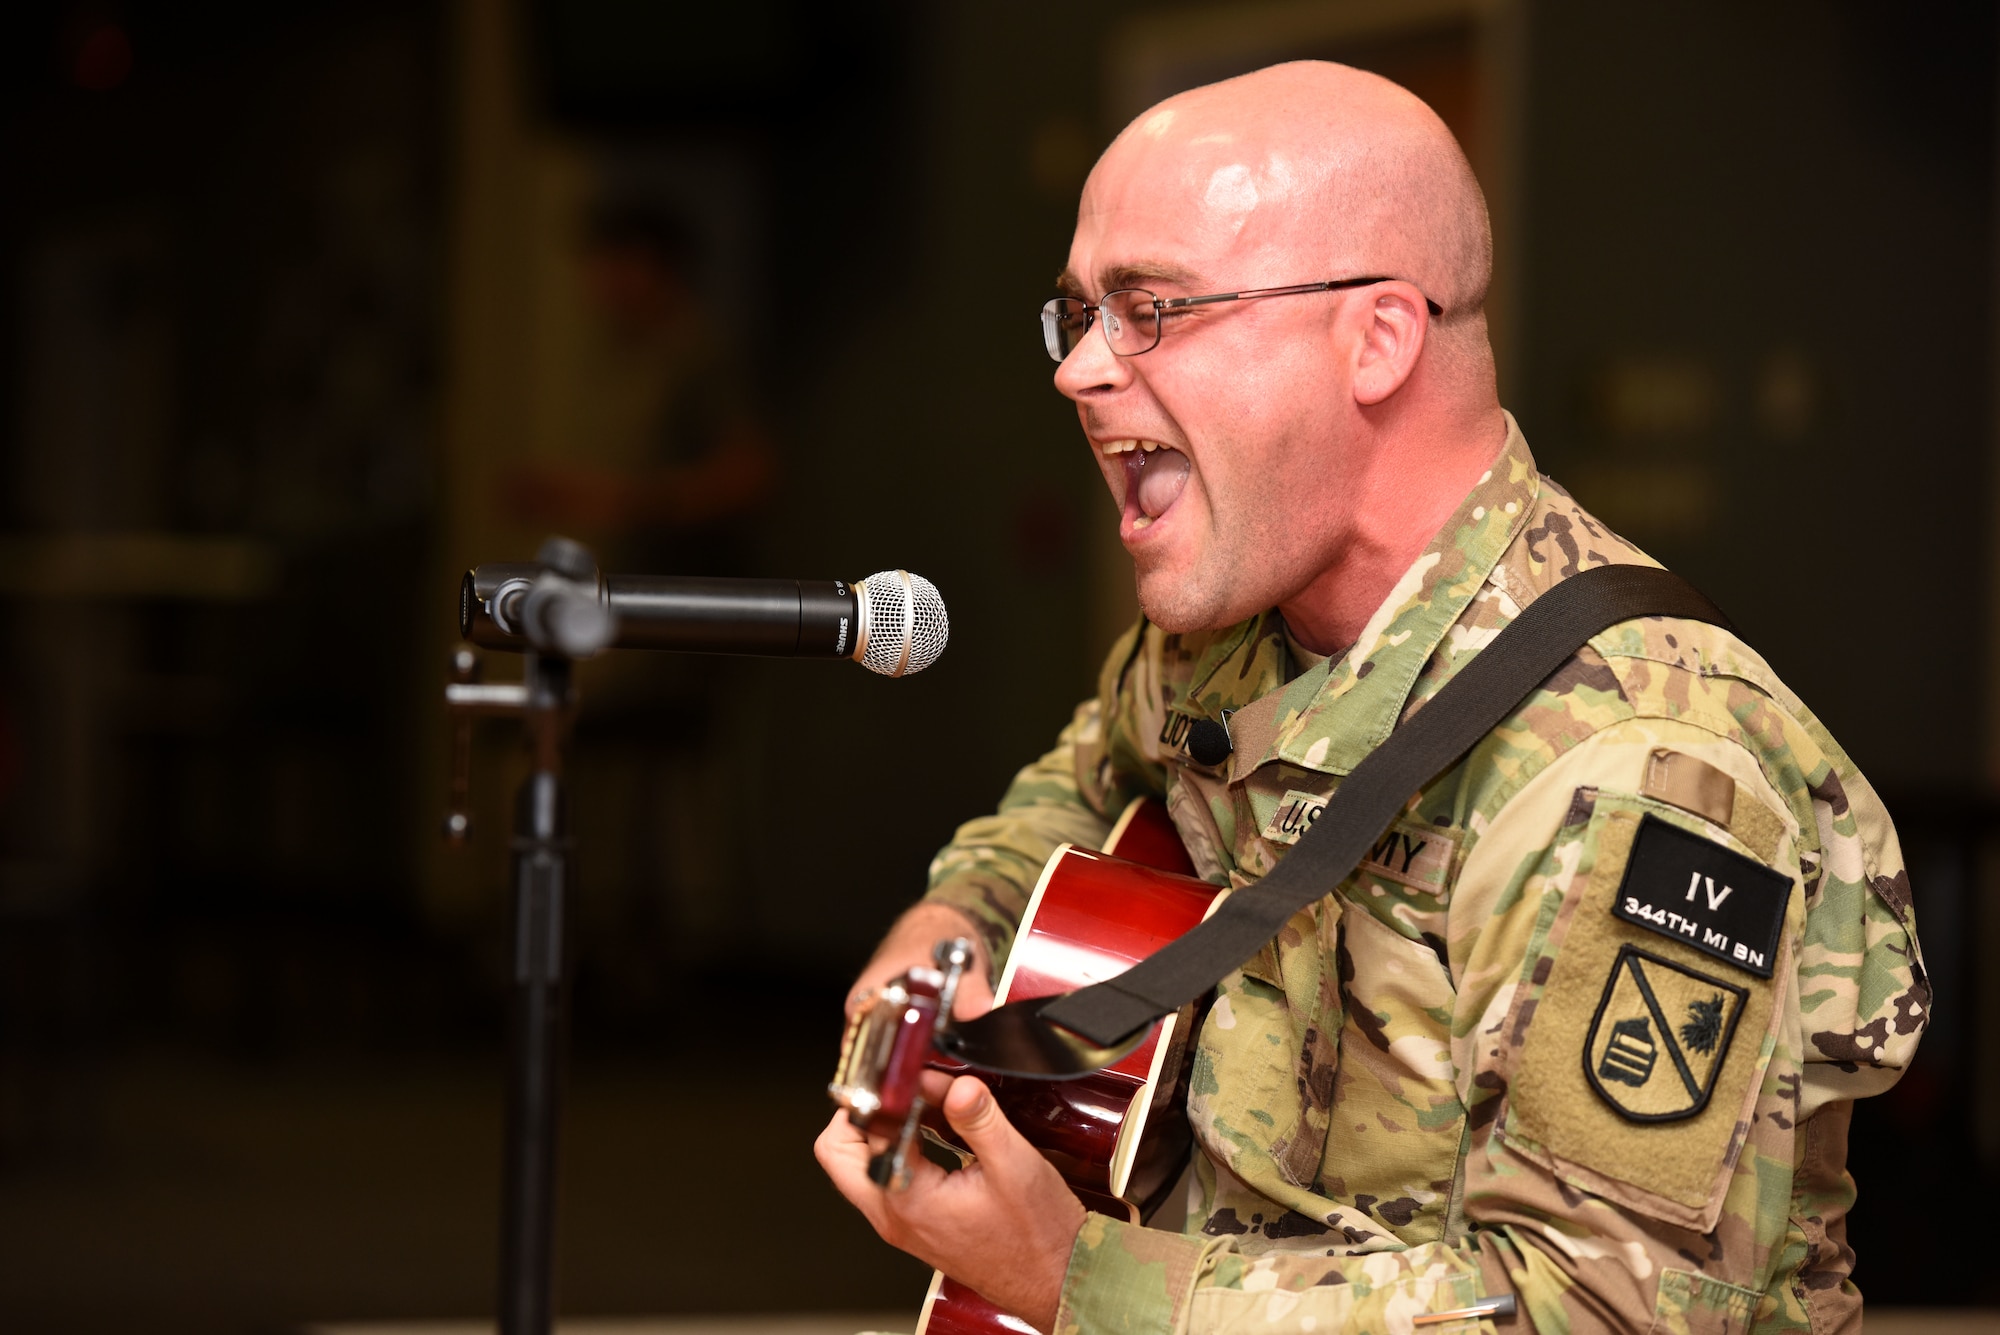 U.S. Army Spc. Michael Pouliot, 344th Military Intelligence Battalion trainee, sings while playing an original song during the Goodfellow’s Got Talent Show at the Event Center on Goodfellow Air Force Base, Texas, June 8, 2018. Pouliot placed third in this year’s competition. (U.S. Air Force photo by Airman 1st Class Seraiah Hines/Released)